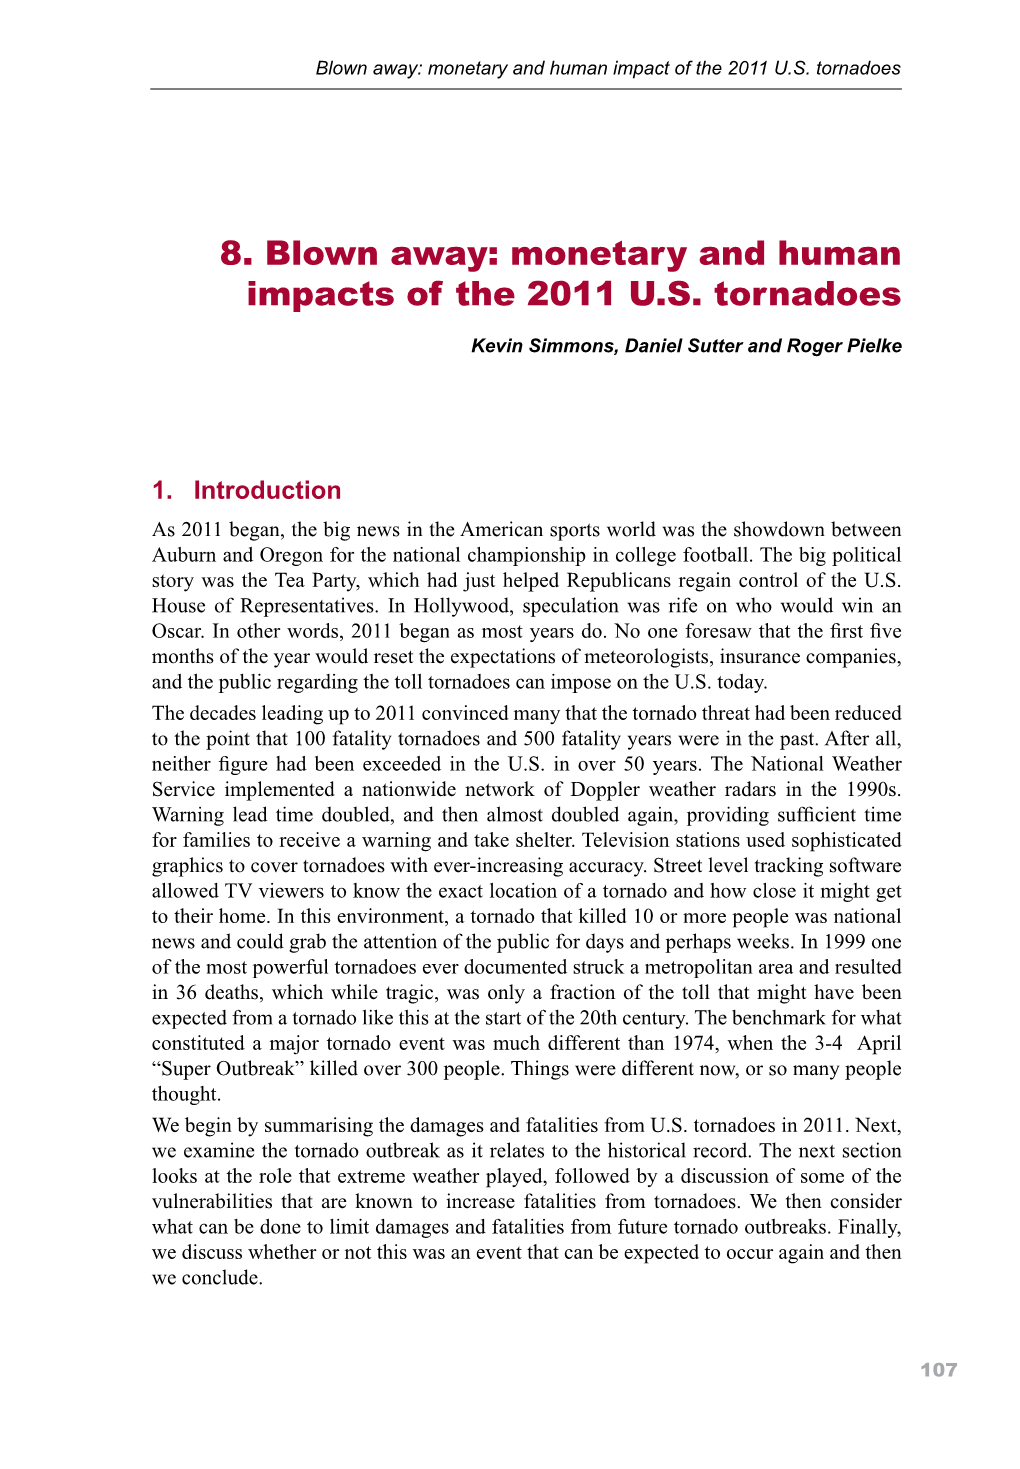 8. Blown Away: Monetary and Human Impacts of the 2011 U.S. Tornadoes